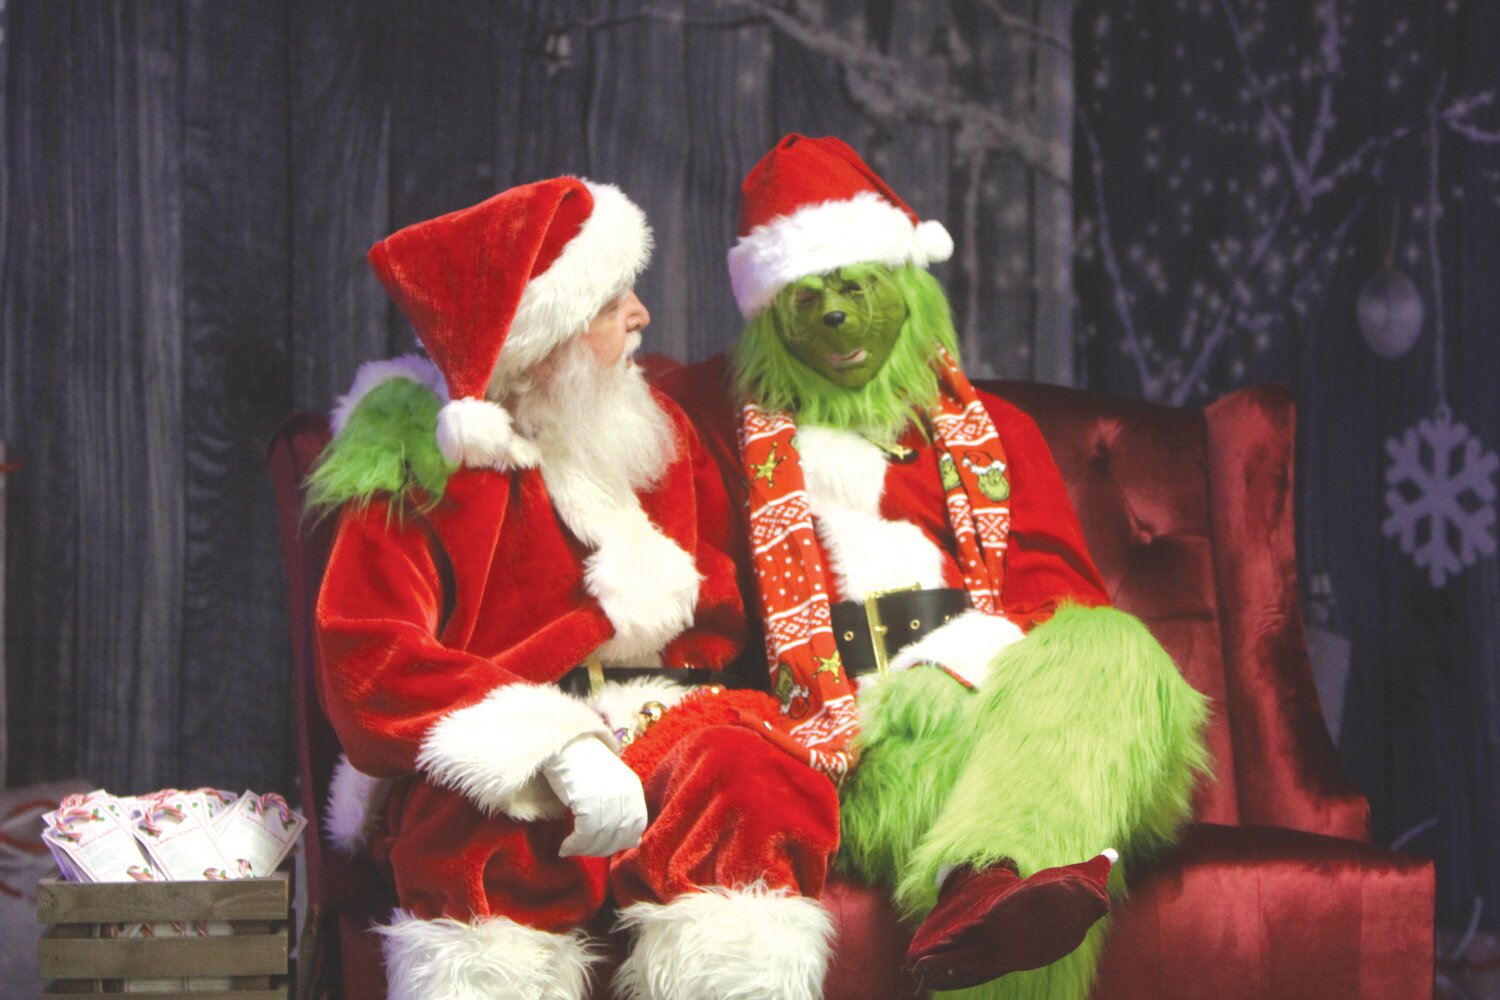 Santa Claus and the Grinch pose during a Saturday at Hometown Christmas at the Montgomery County Fairgrounds Merchants Building last year. Hometown Christmas returns from Dec. 8-10, with all businesses in Montgomery City opening late on Dec. 8.